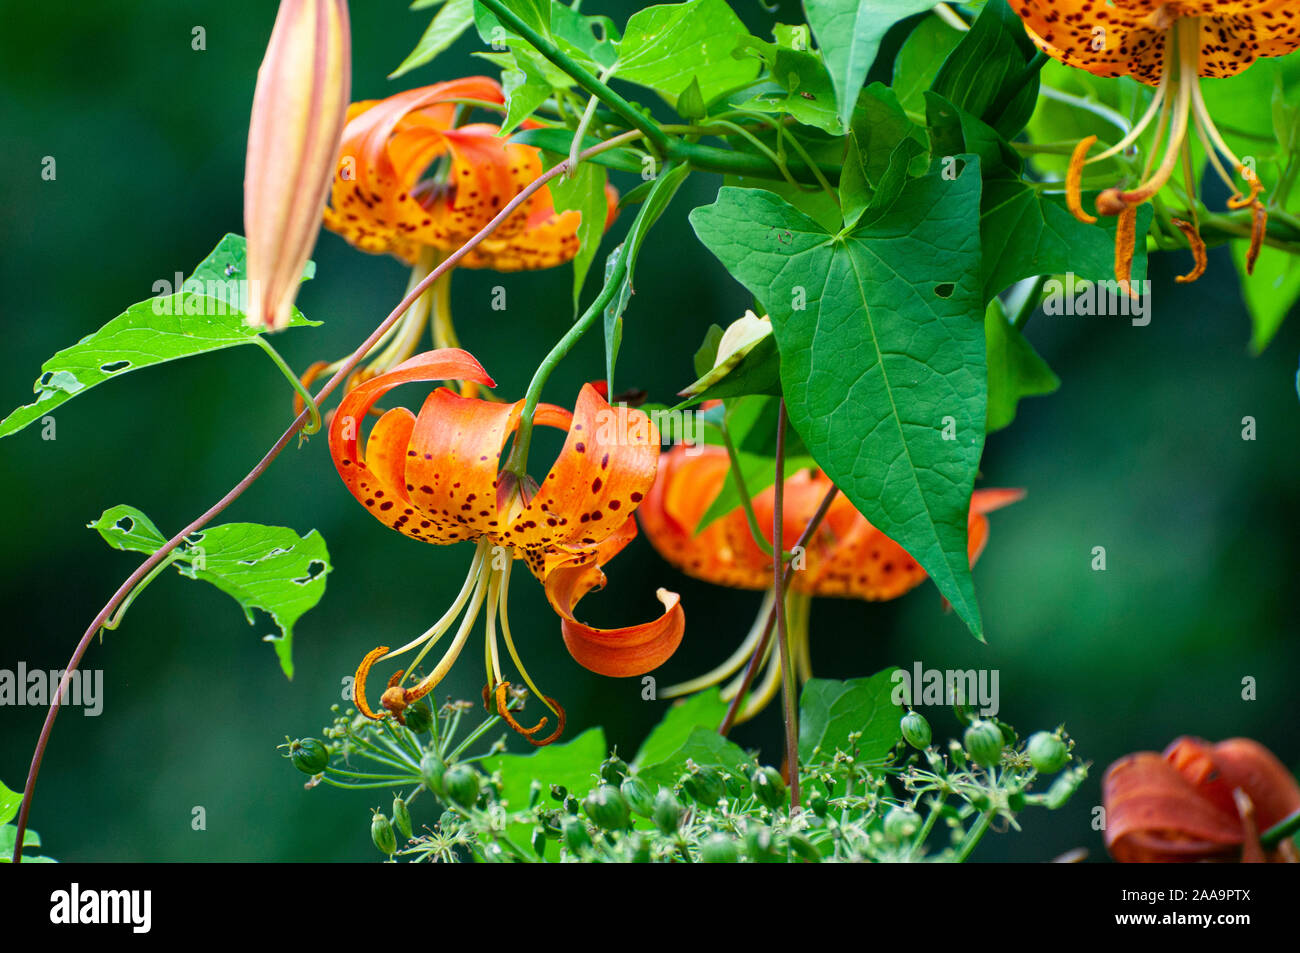 Lilies with bulbs that are blooming in the springtime. Stock Photo